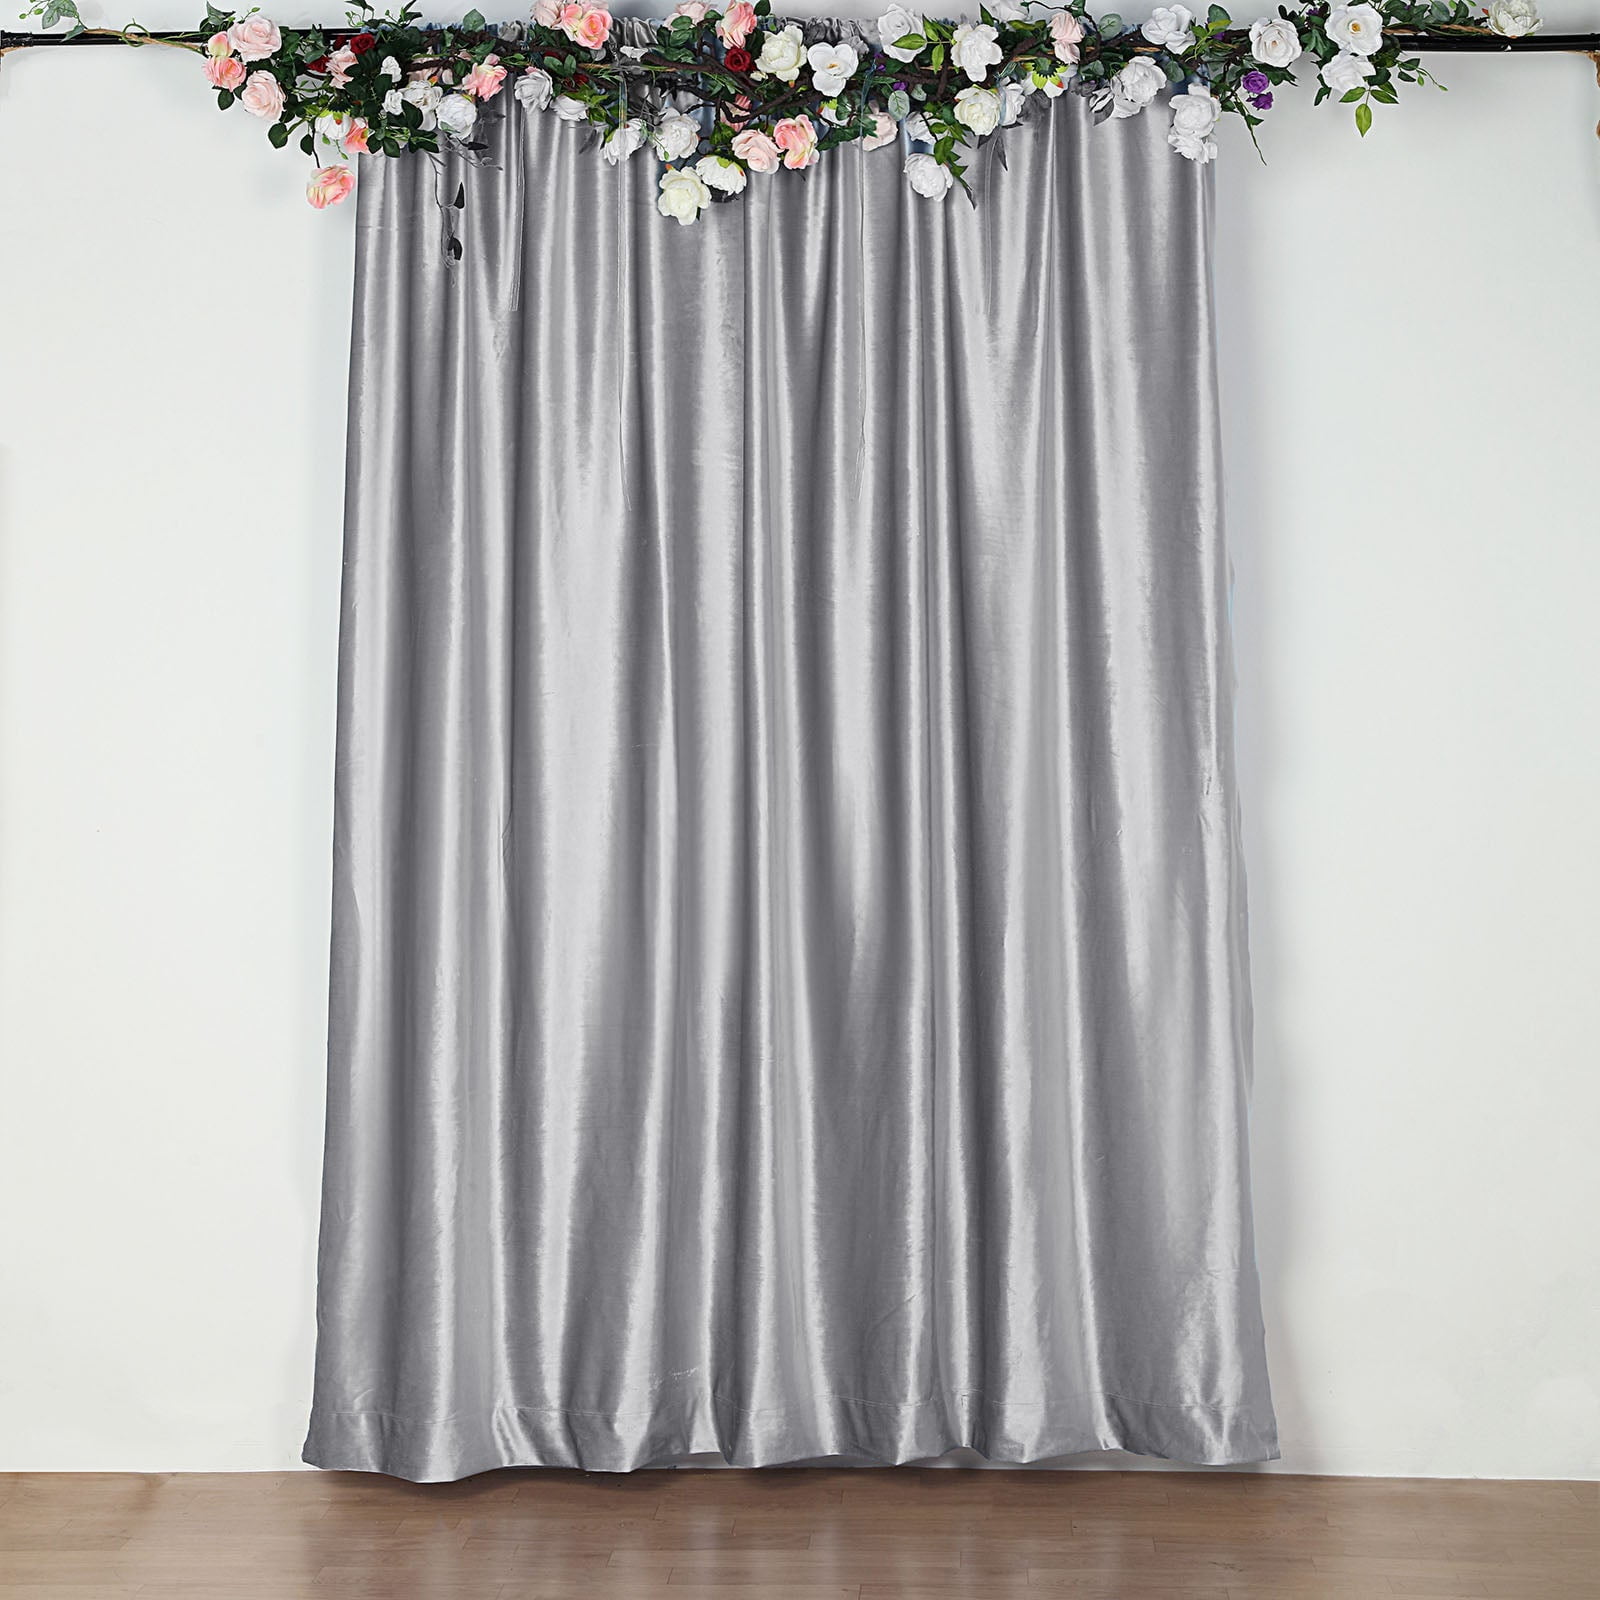 Light Blue SEAMLESS Backdrop Drape Panel All Sizes Available in Polyester Poplin Party Supplies Curtains.